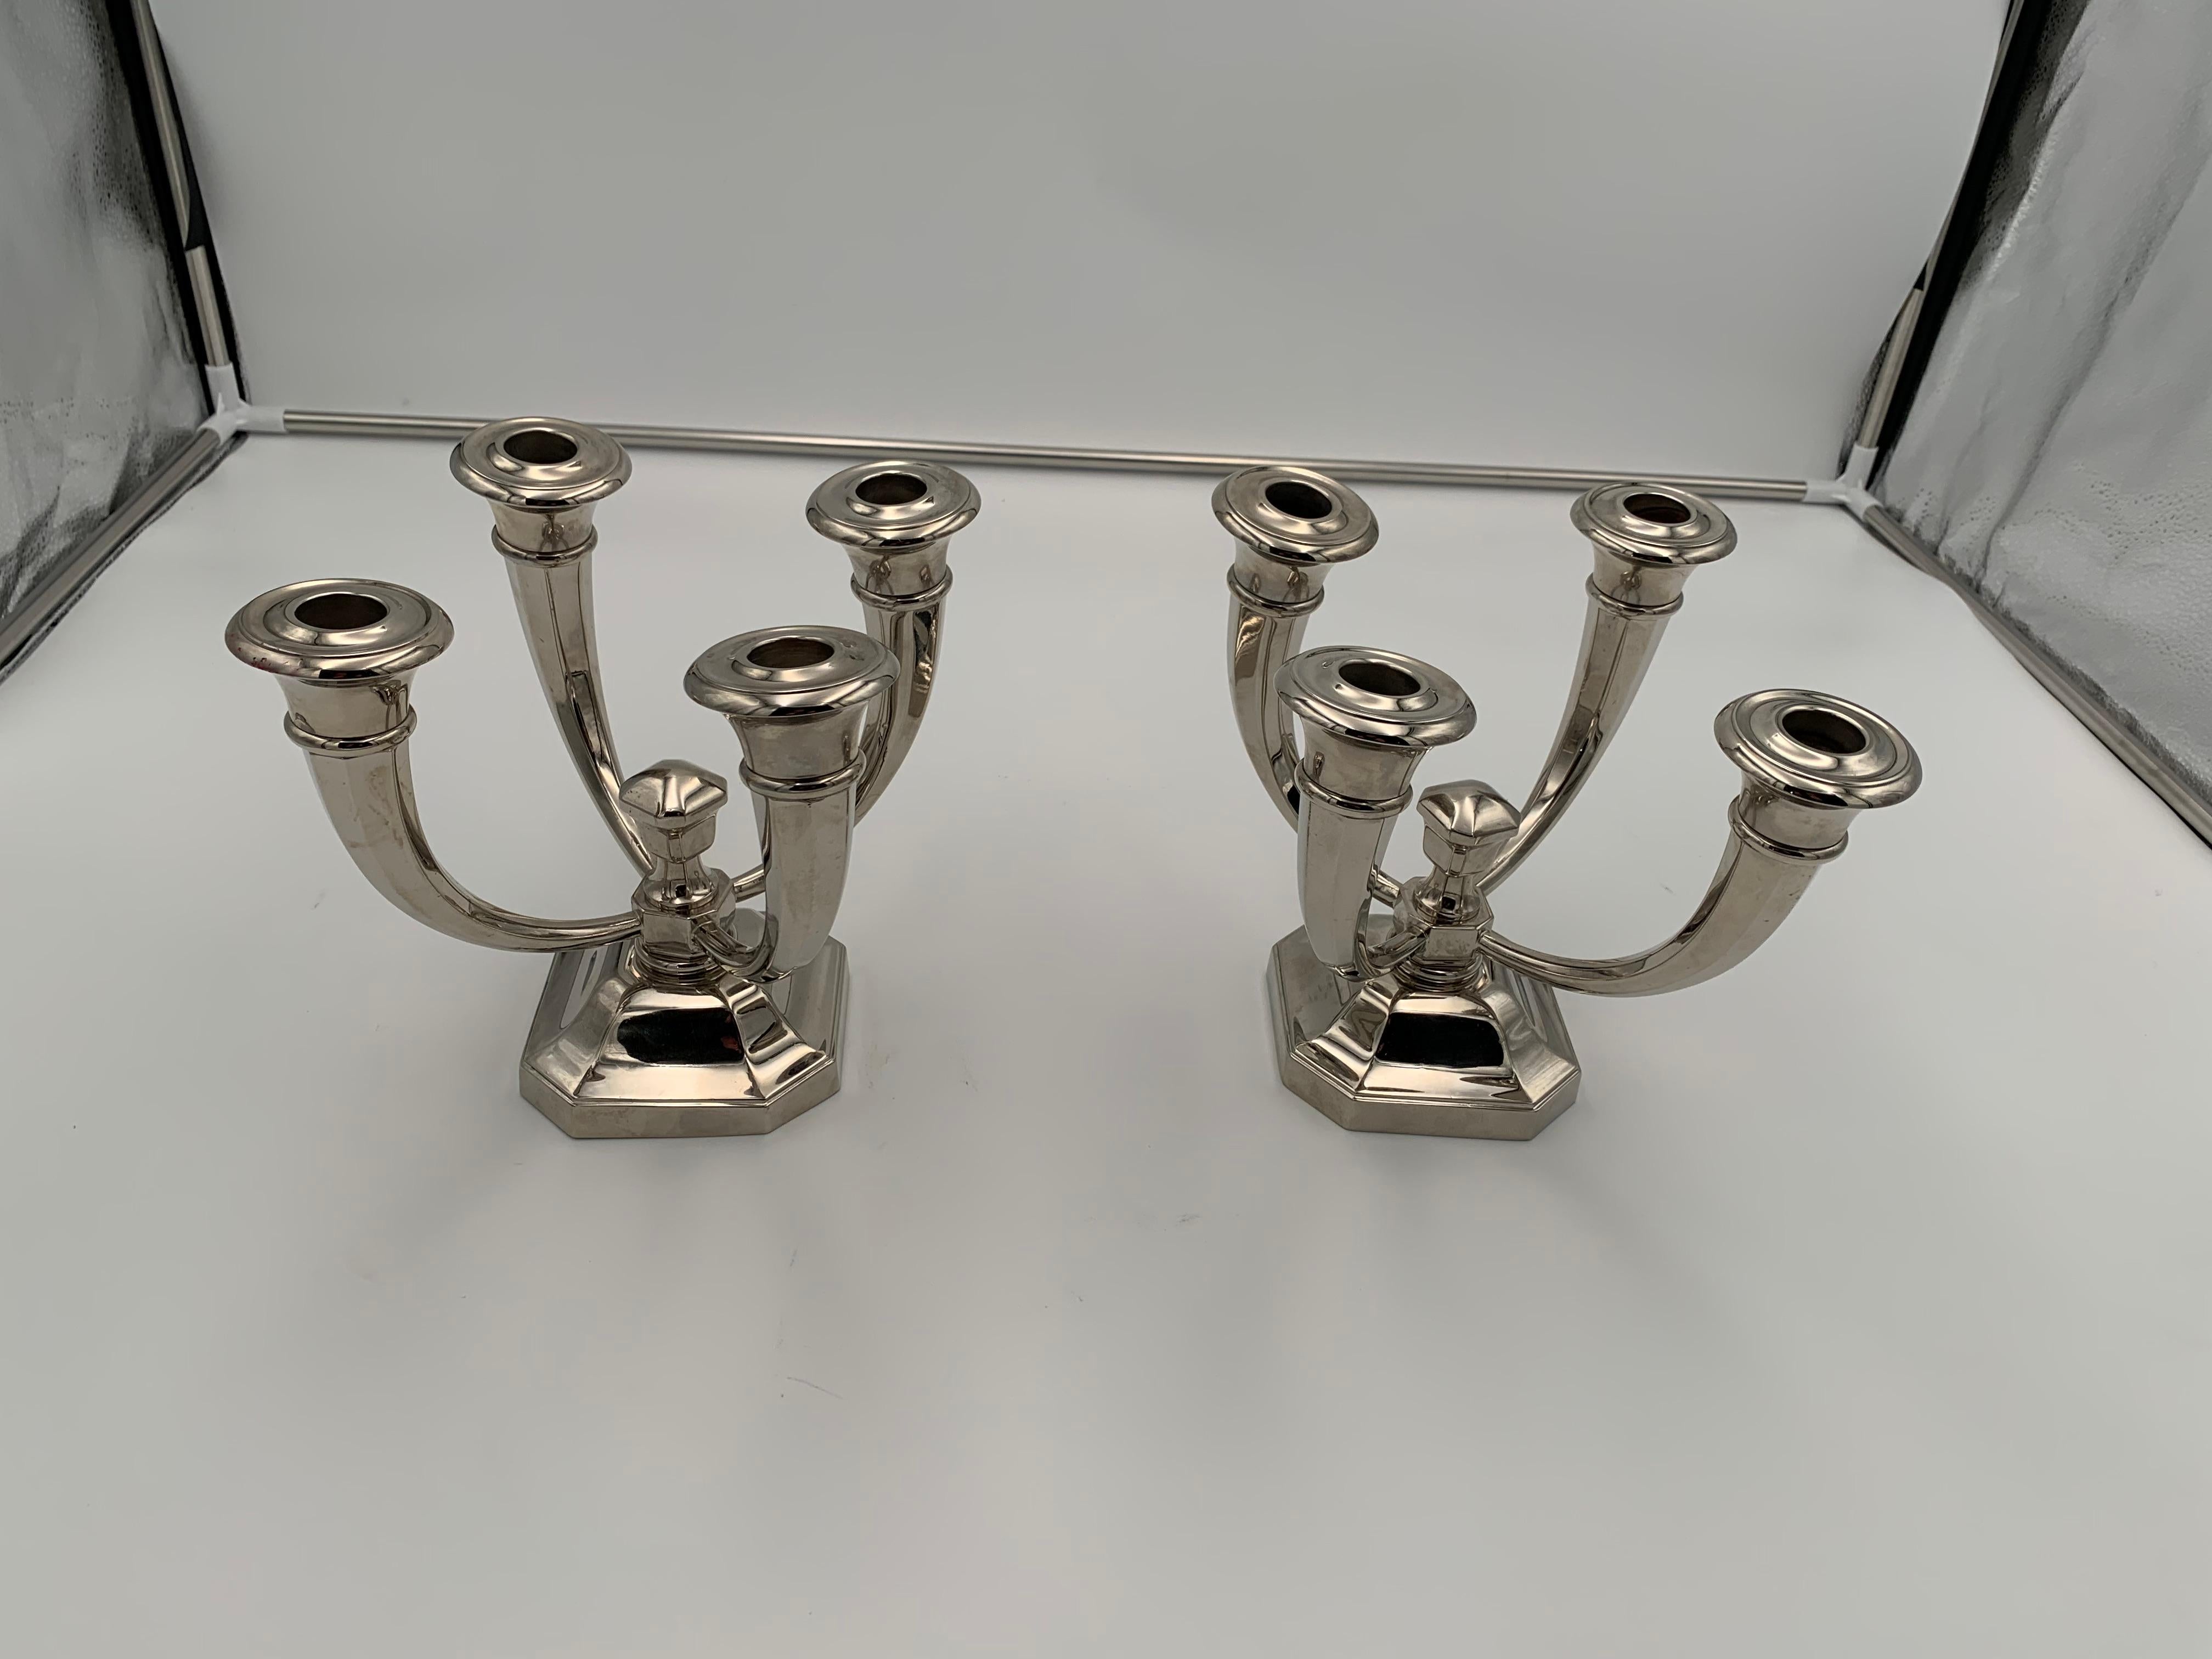 Pair of Art Deco candlesticks by J. Leleu, nickel-plated bronze, France, circa 1930.

Very fine and elegant pair of four-armed Art Deco candlesticks / candleholders / candelabras by Jules Leleu (1883 - 1961).
Excellent quality, heavy cast bronze